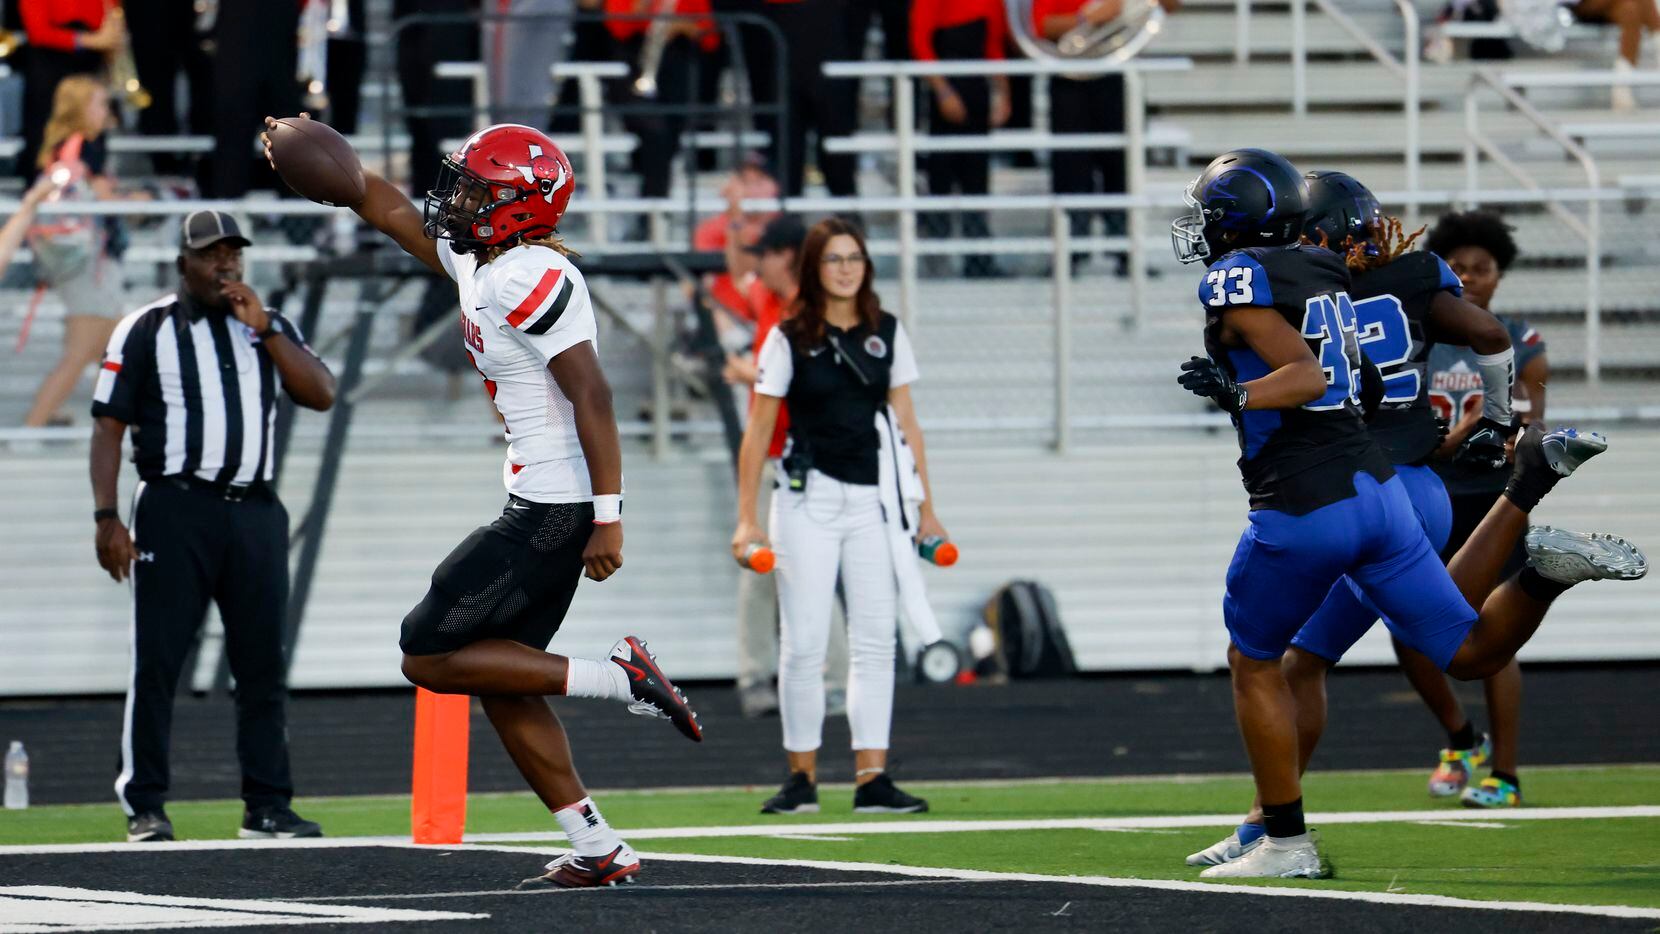 Mesquite Horn’s J.T. Thomas quarterback (2) outruns the North Forney defense for a touchdown...